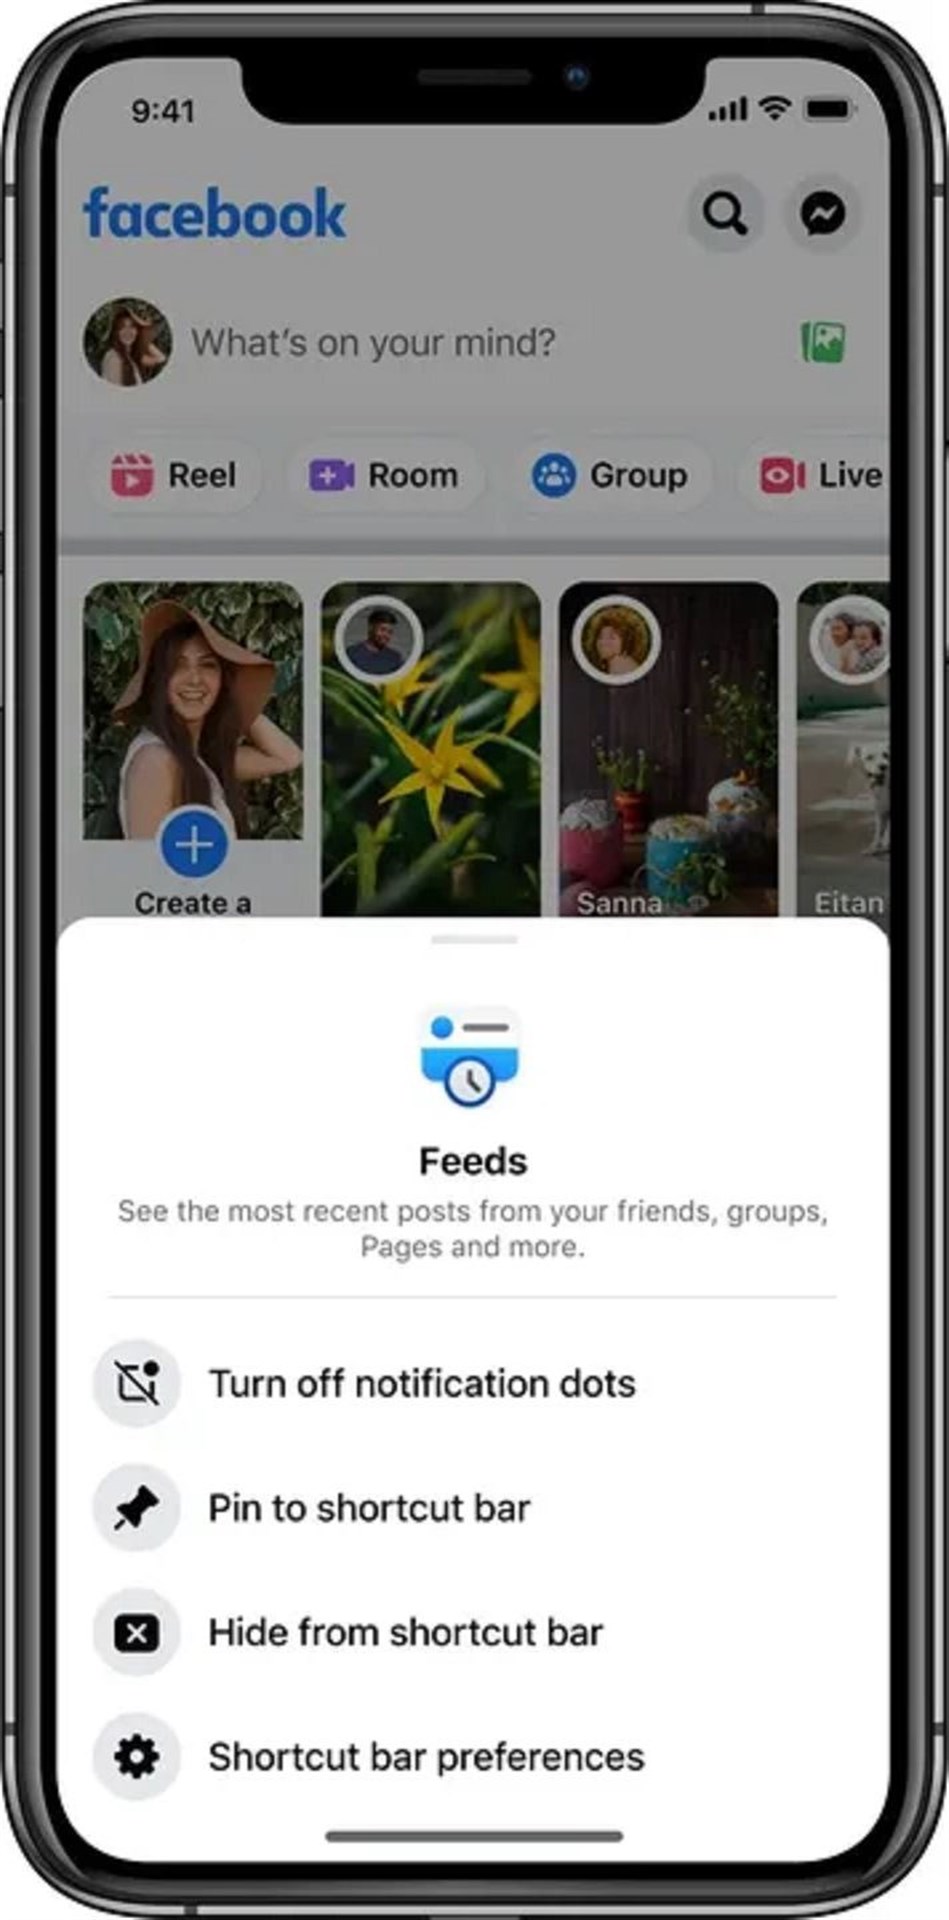 Facebook said the Feeds tab would become the place to see the latest posts from friends. (Facebook)